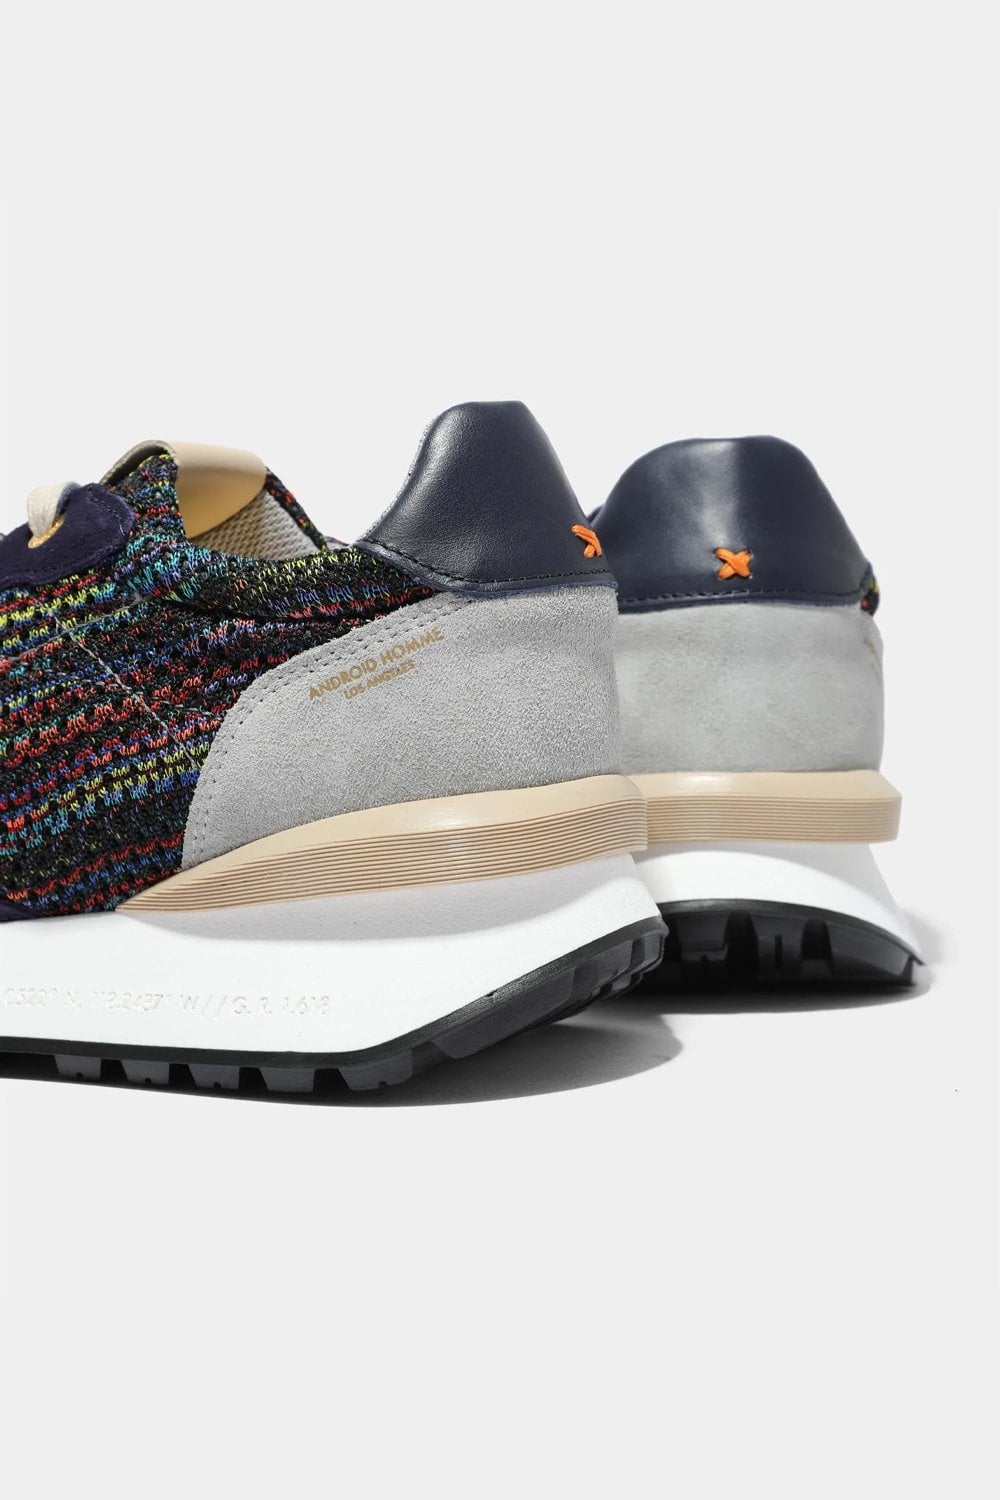 Buy the Android Homme Marina Del Rey Knit Trainers in Multicolour at Intro. Spend £50 for free UK delivery. Official stockists. We ship worldwide.